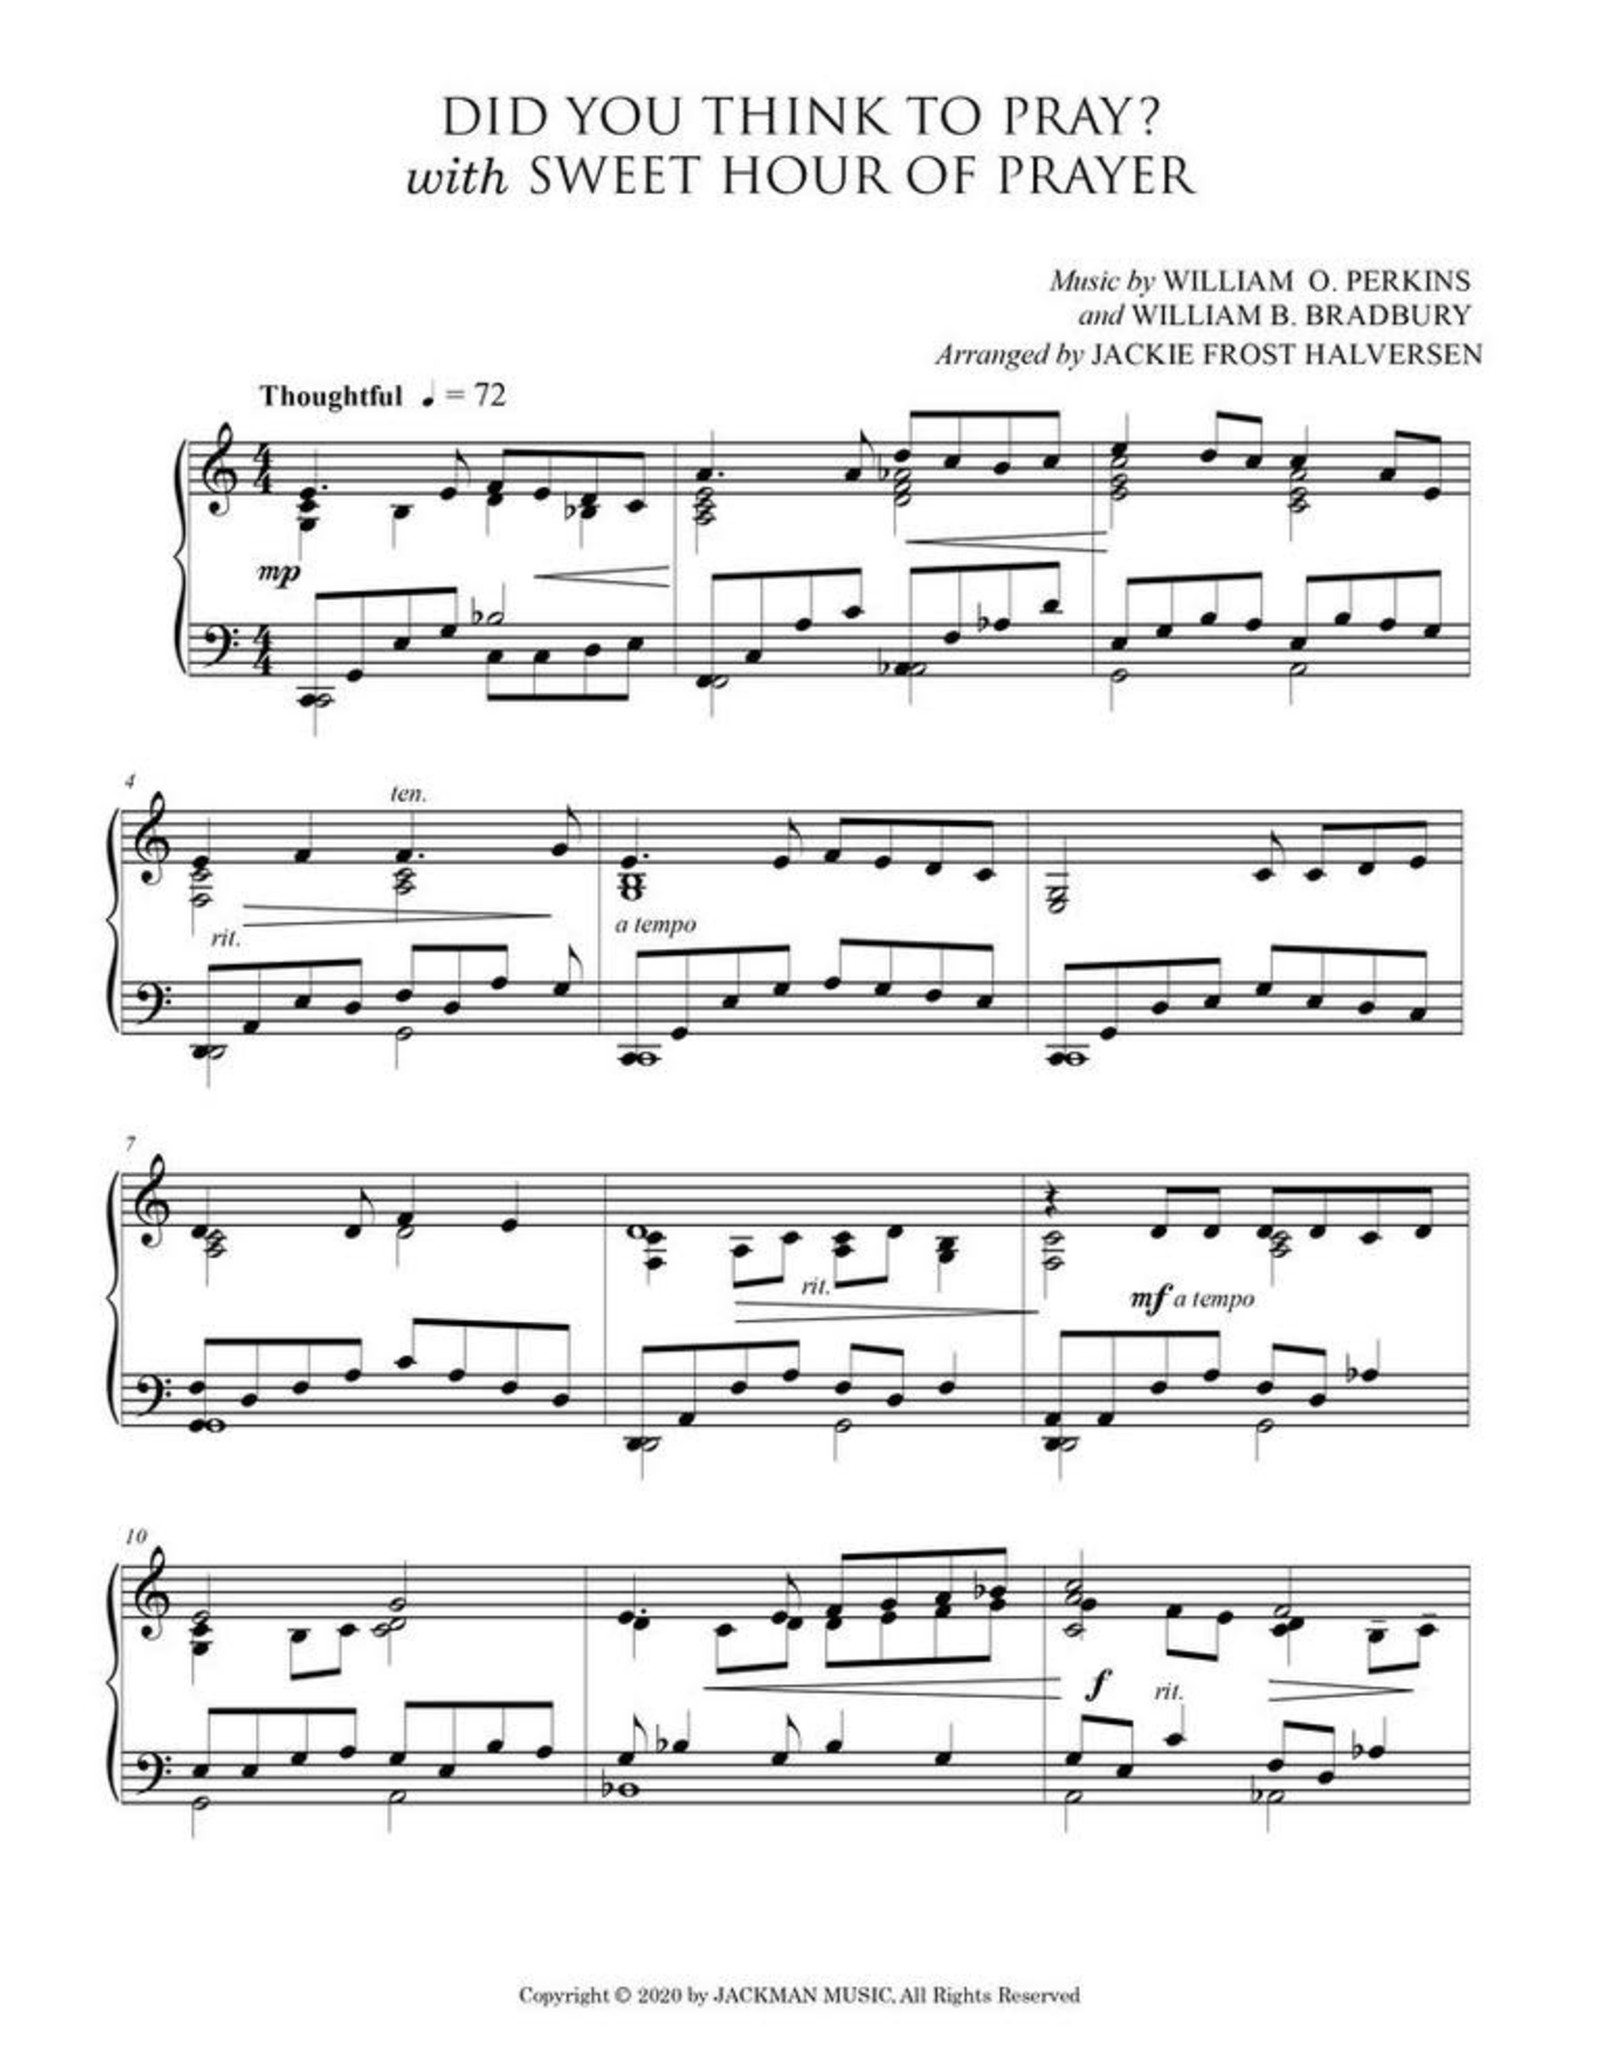 Jackman Music Sacred Hymns for Solo Piano Volume 1 arr. Jackie Frost Halversen